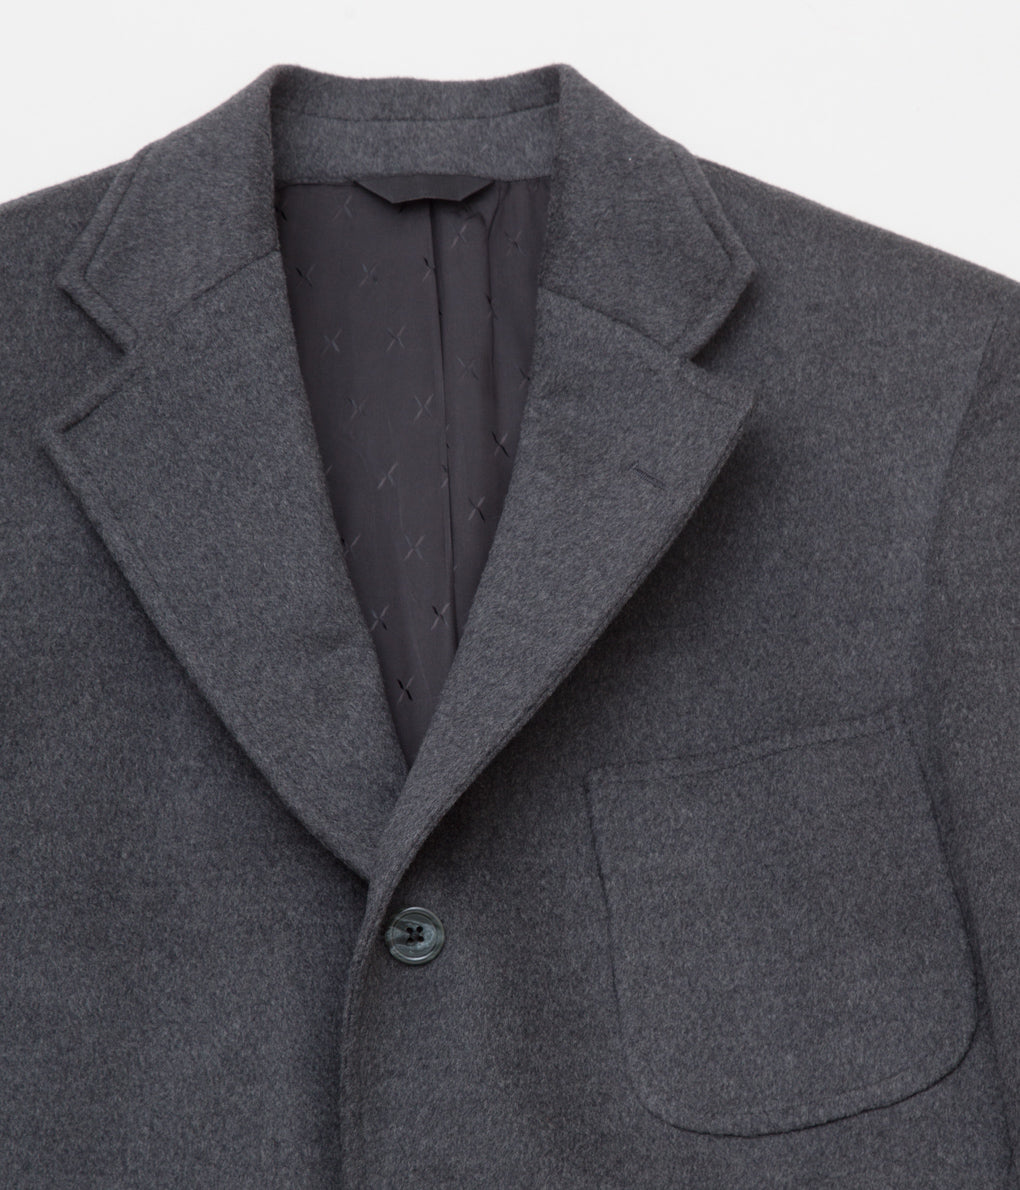 INDIVIDUALIZED CLOTHING "CHARCOAL HEAVY FLANNEL SPORTCOAT"(CHARCOAL)